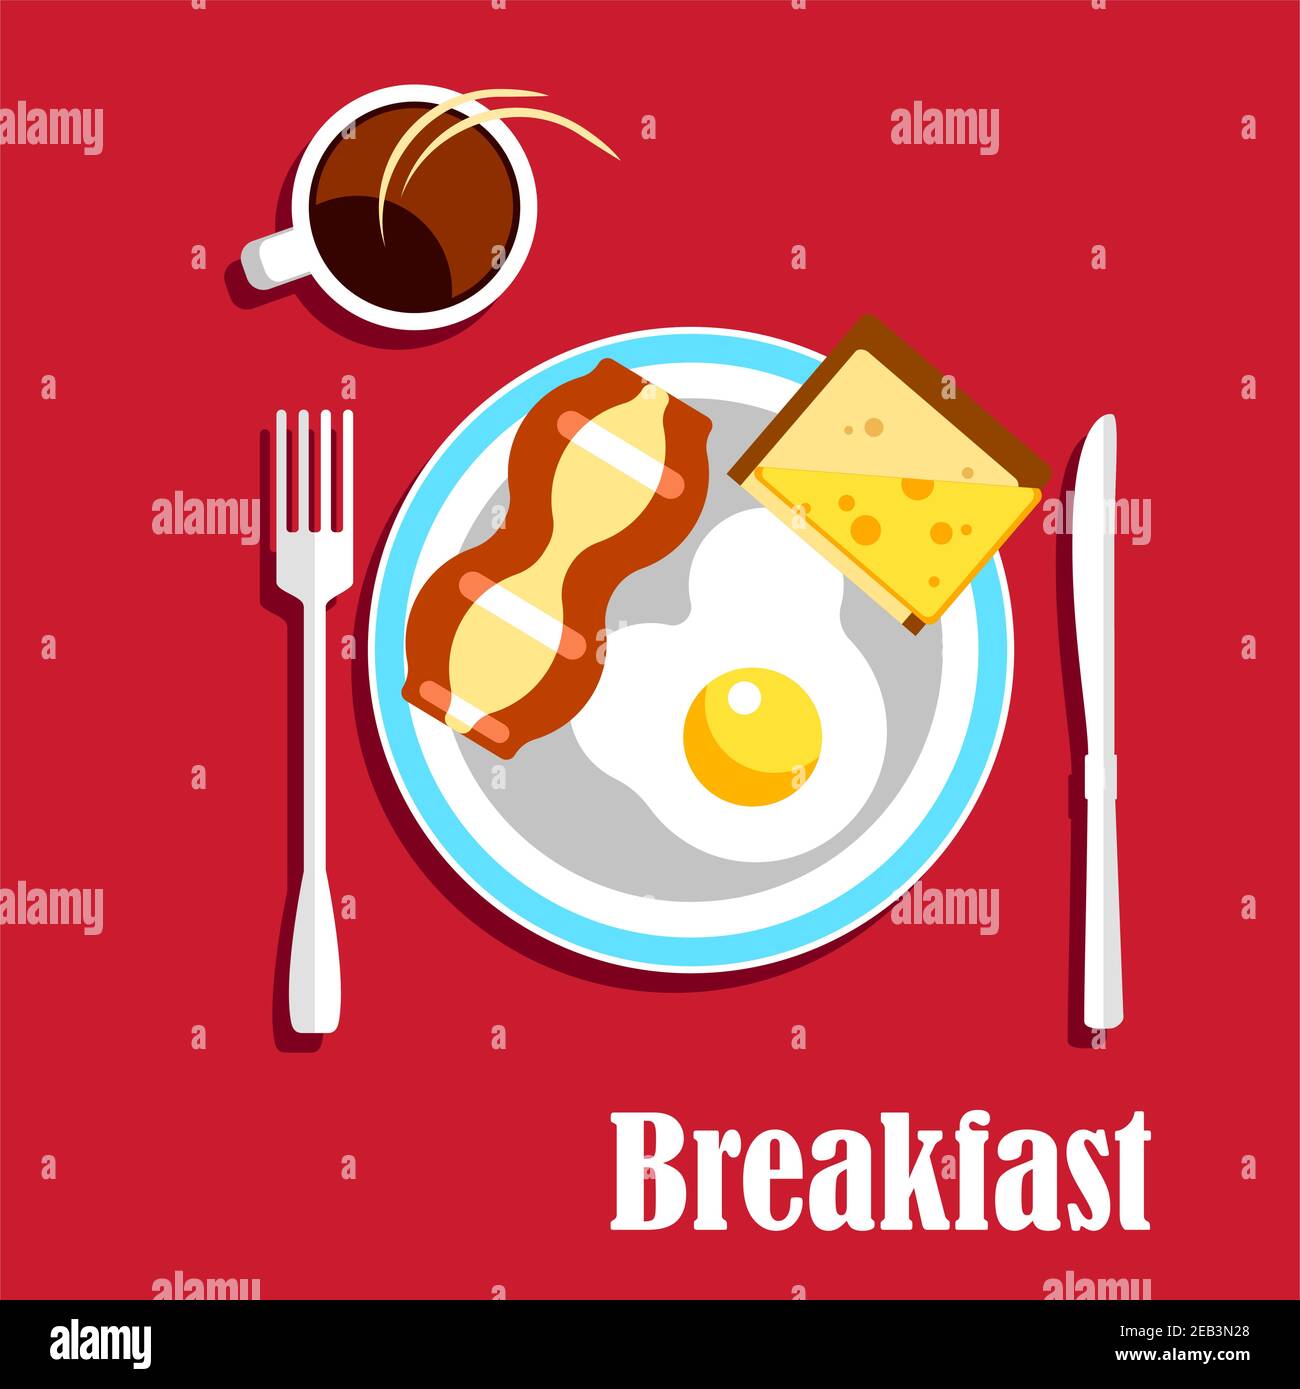 Traditional english breakfast menu with cup of hot coffee, fried egg with crispy slice of bacon and sandwich with toasted bread and cheese, served on Stock Vector